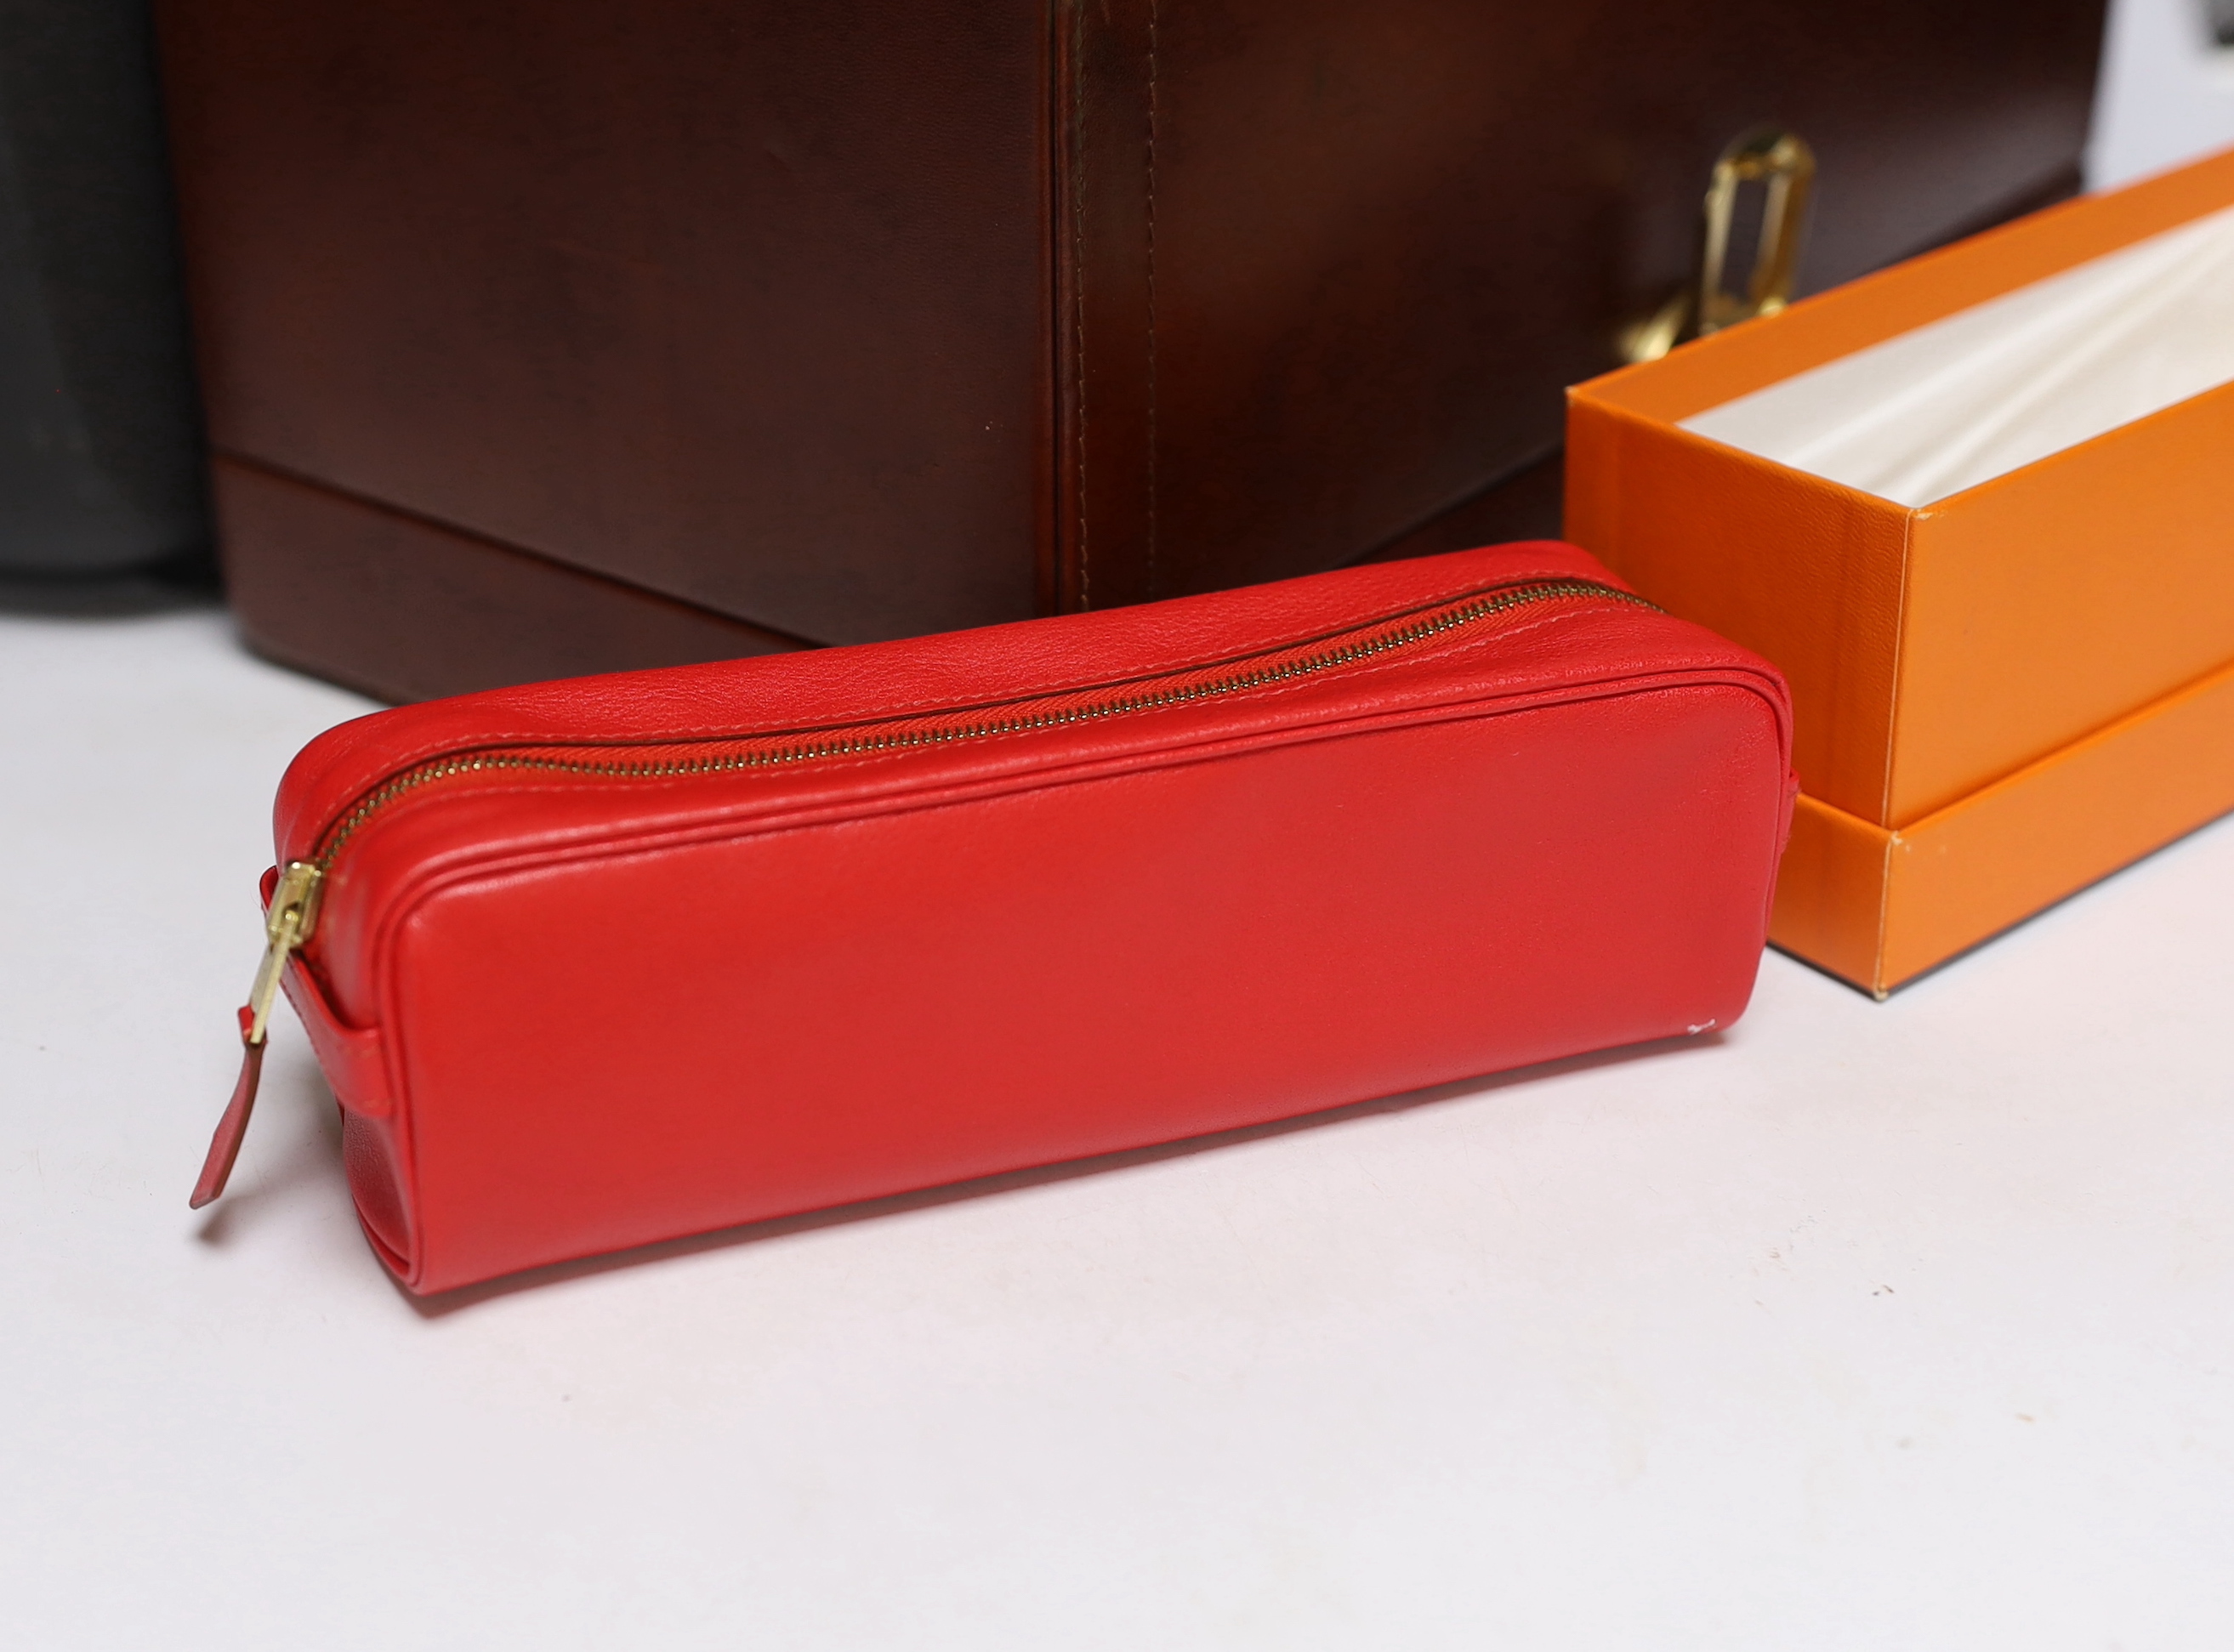 Hermes boxed red leather pen case, a Samsonite black hard plastic overnight case and a brown leather vanity/jewllery case, largest 34cm high